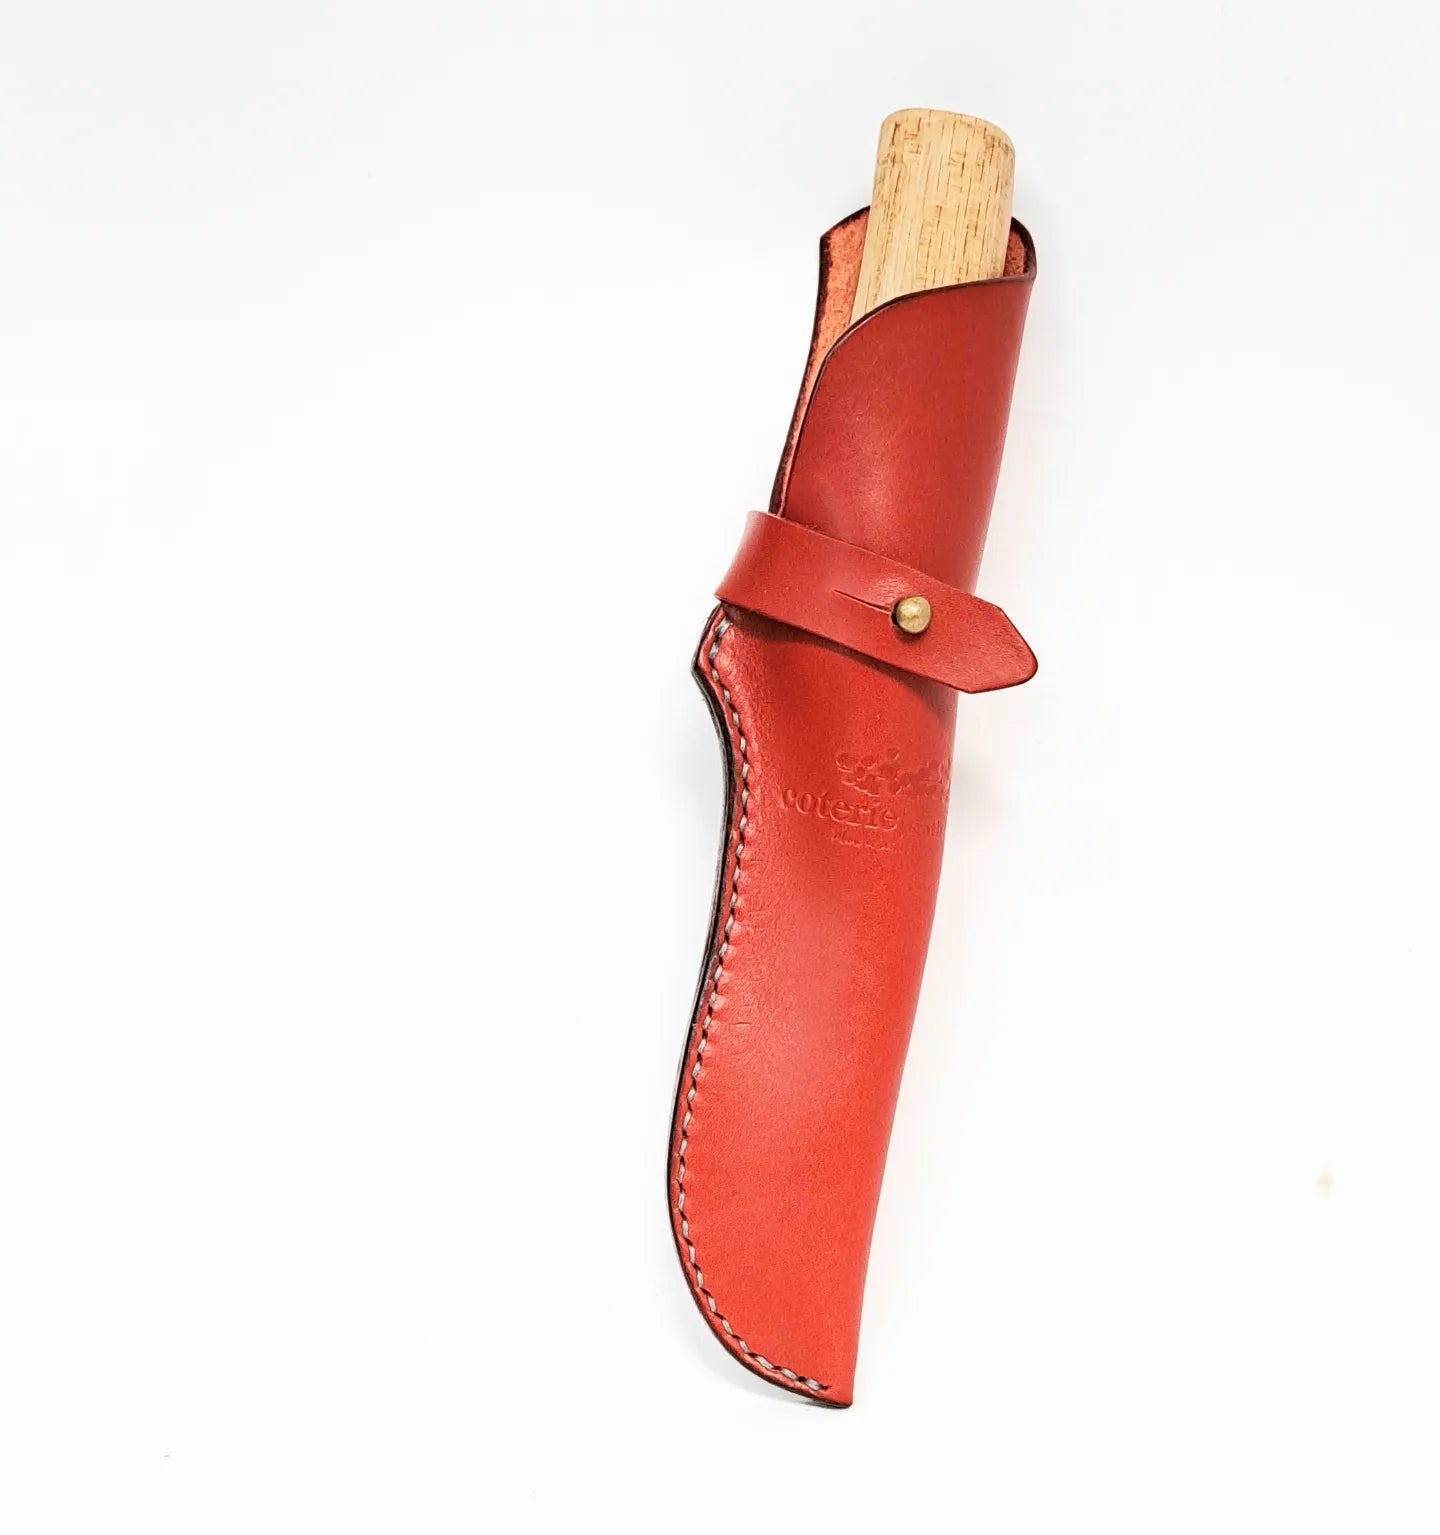 Make your Knife or Axe a Leather Sheath